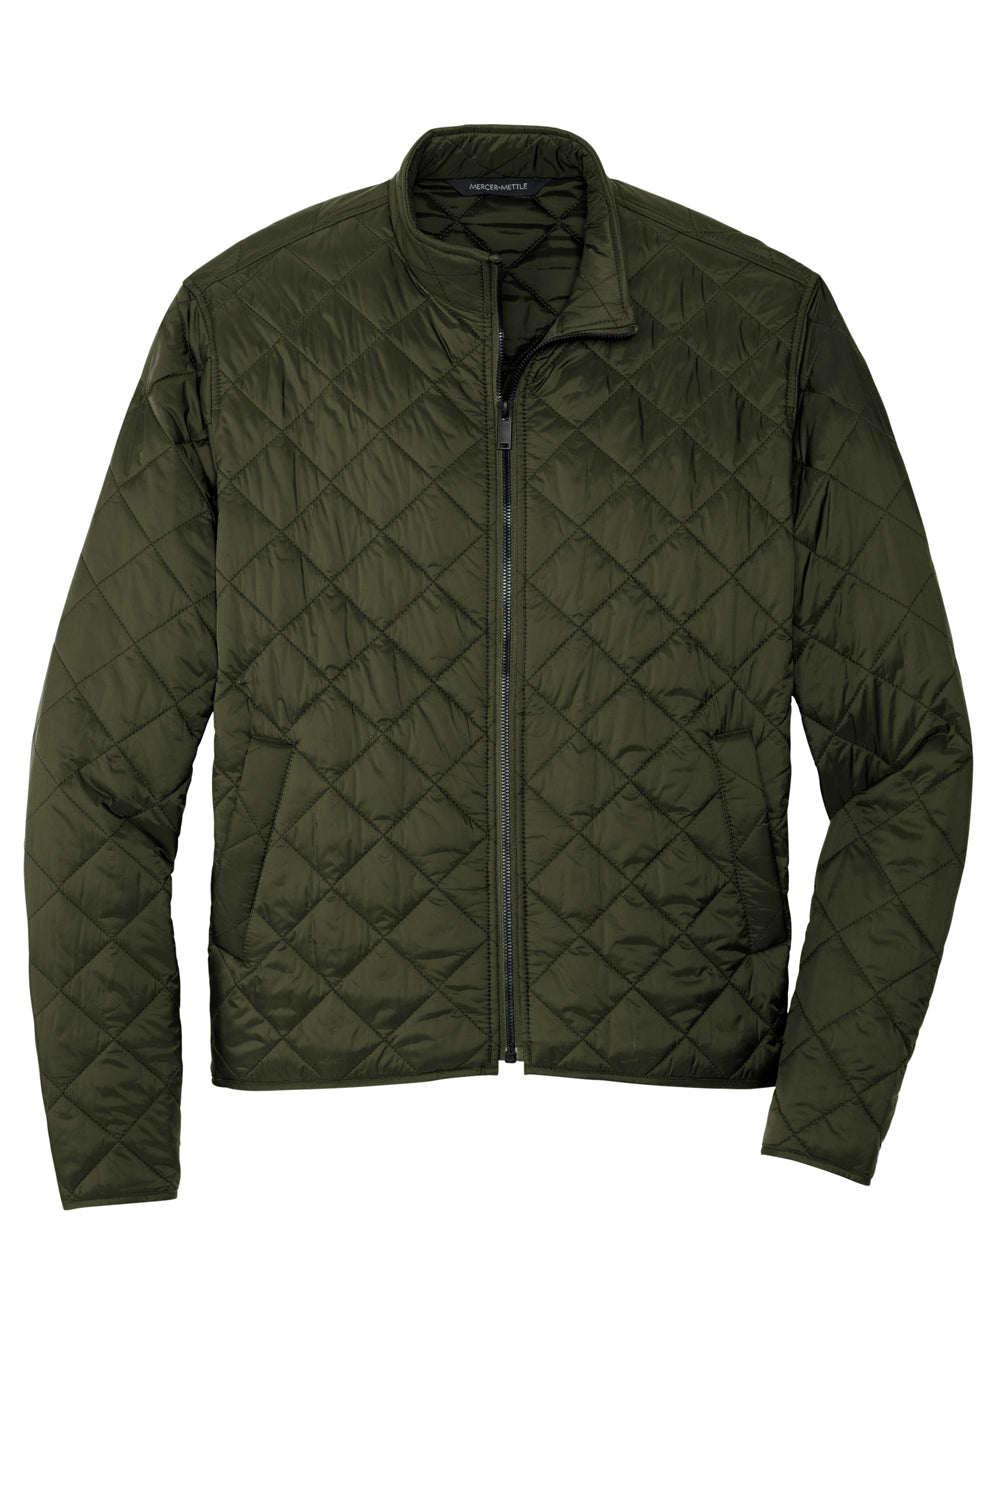 Mercer+Mettle MM7200 Quilted Full Zip Jacket Townsend Green Flat Front